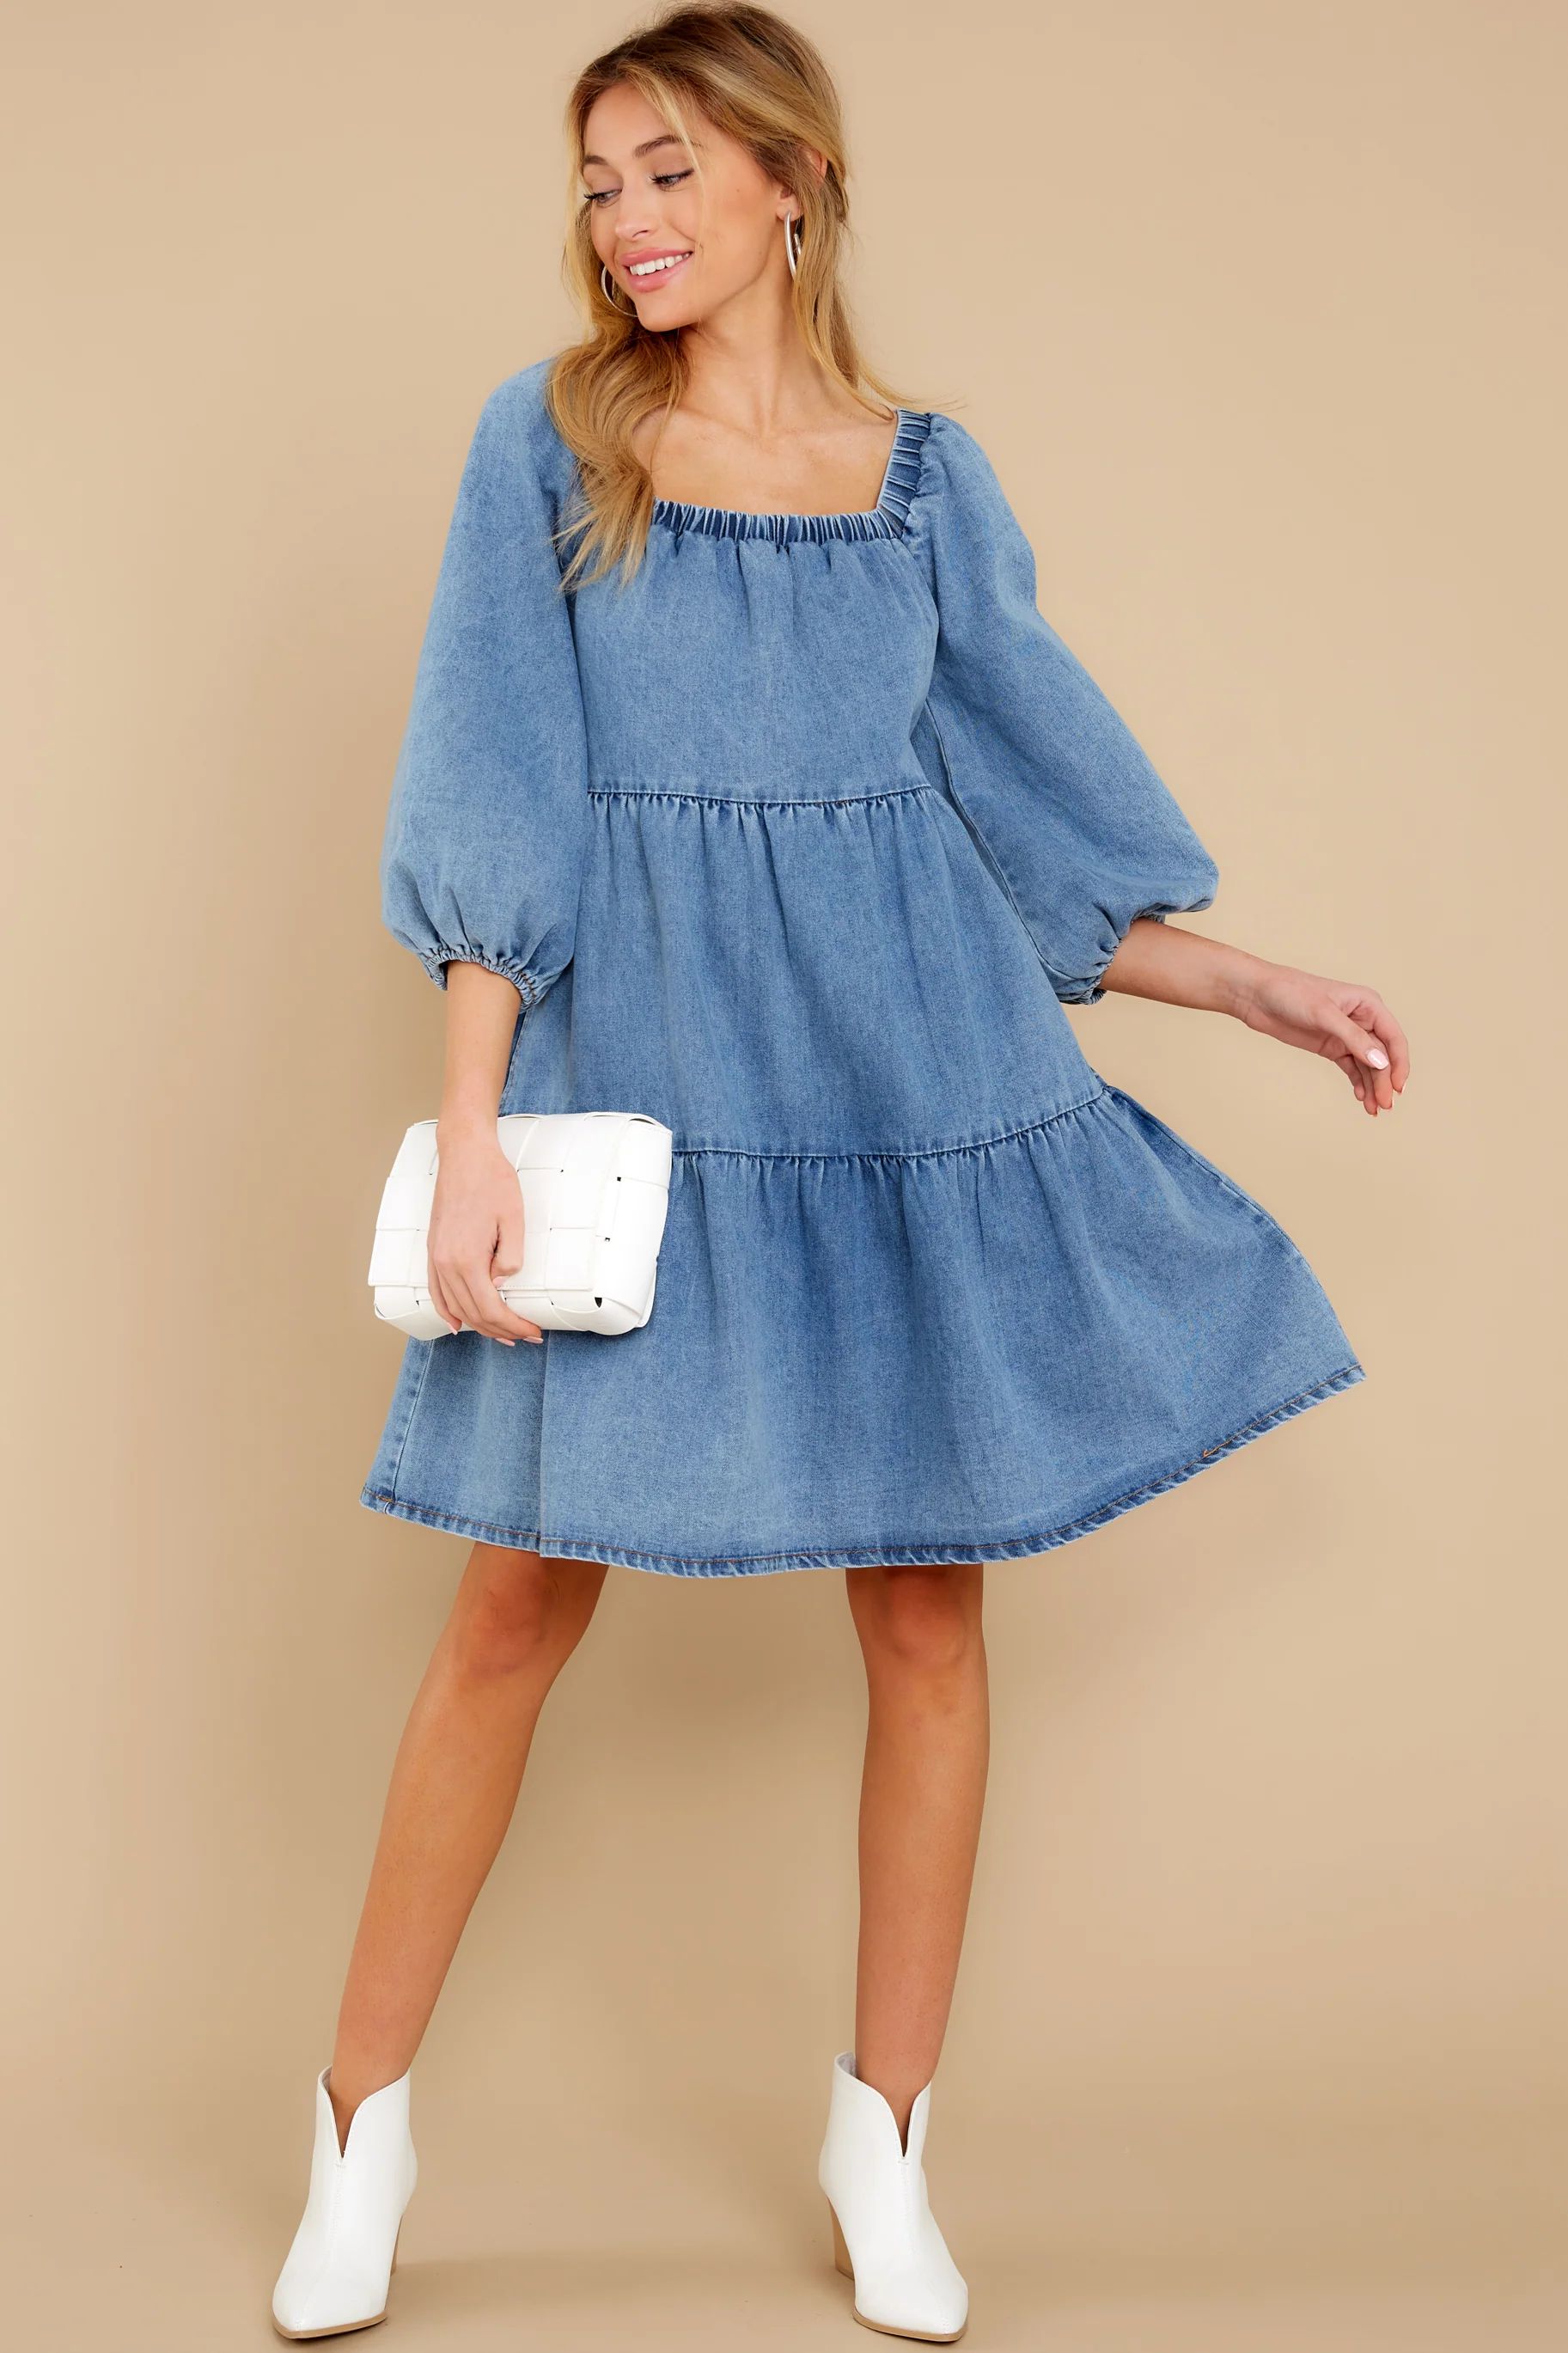 Obvious Attraction Denim Dress | Red Dress 